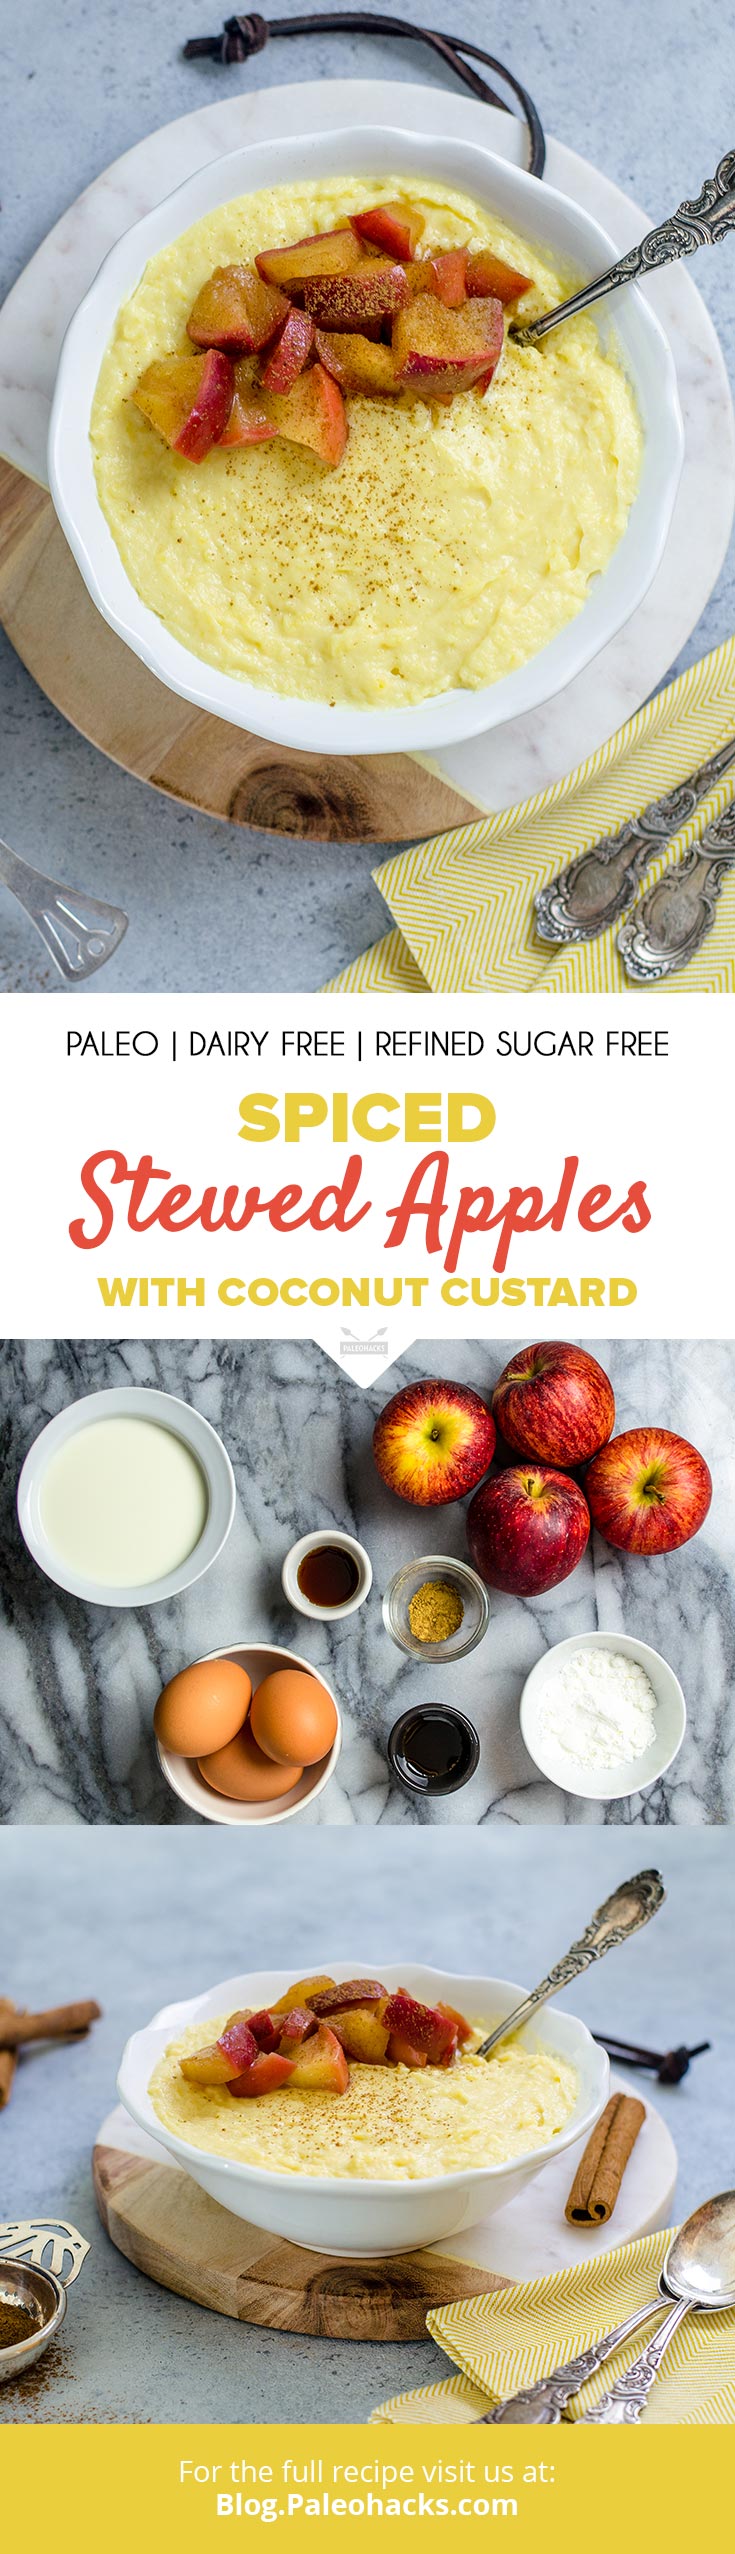 Creamy, dairy-free coconut custard is topped with warm stewed apple slices for a light and healthy dessert.